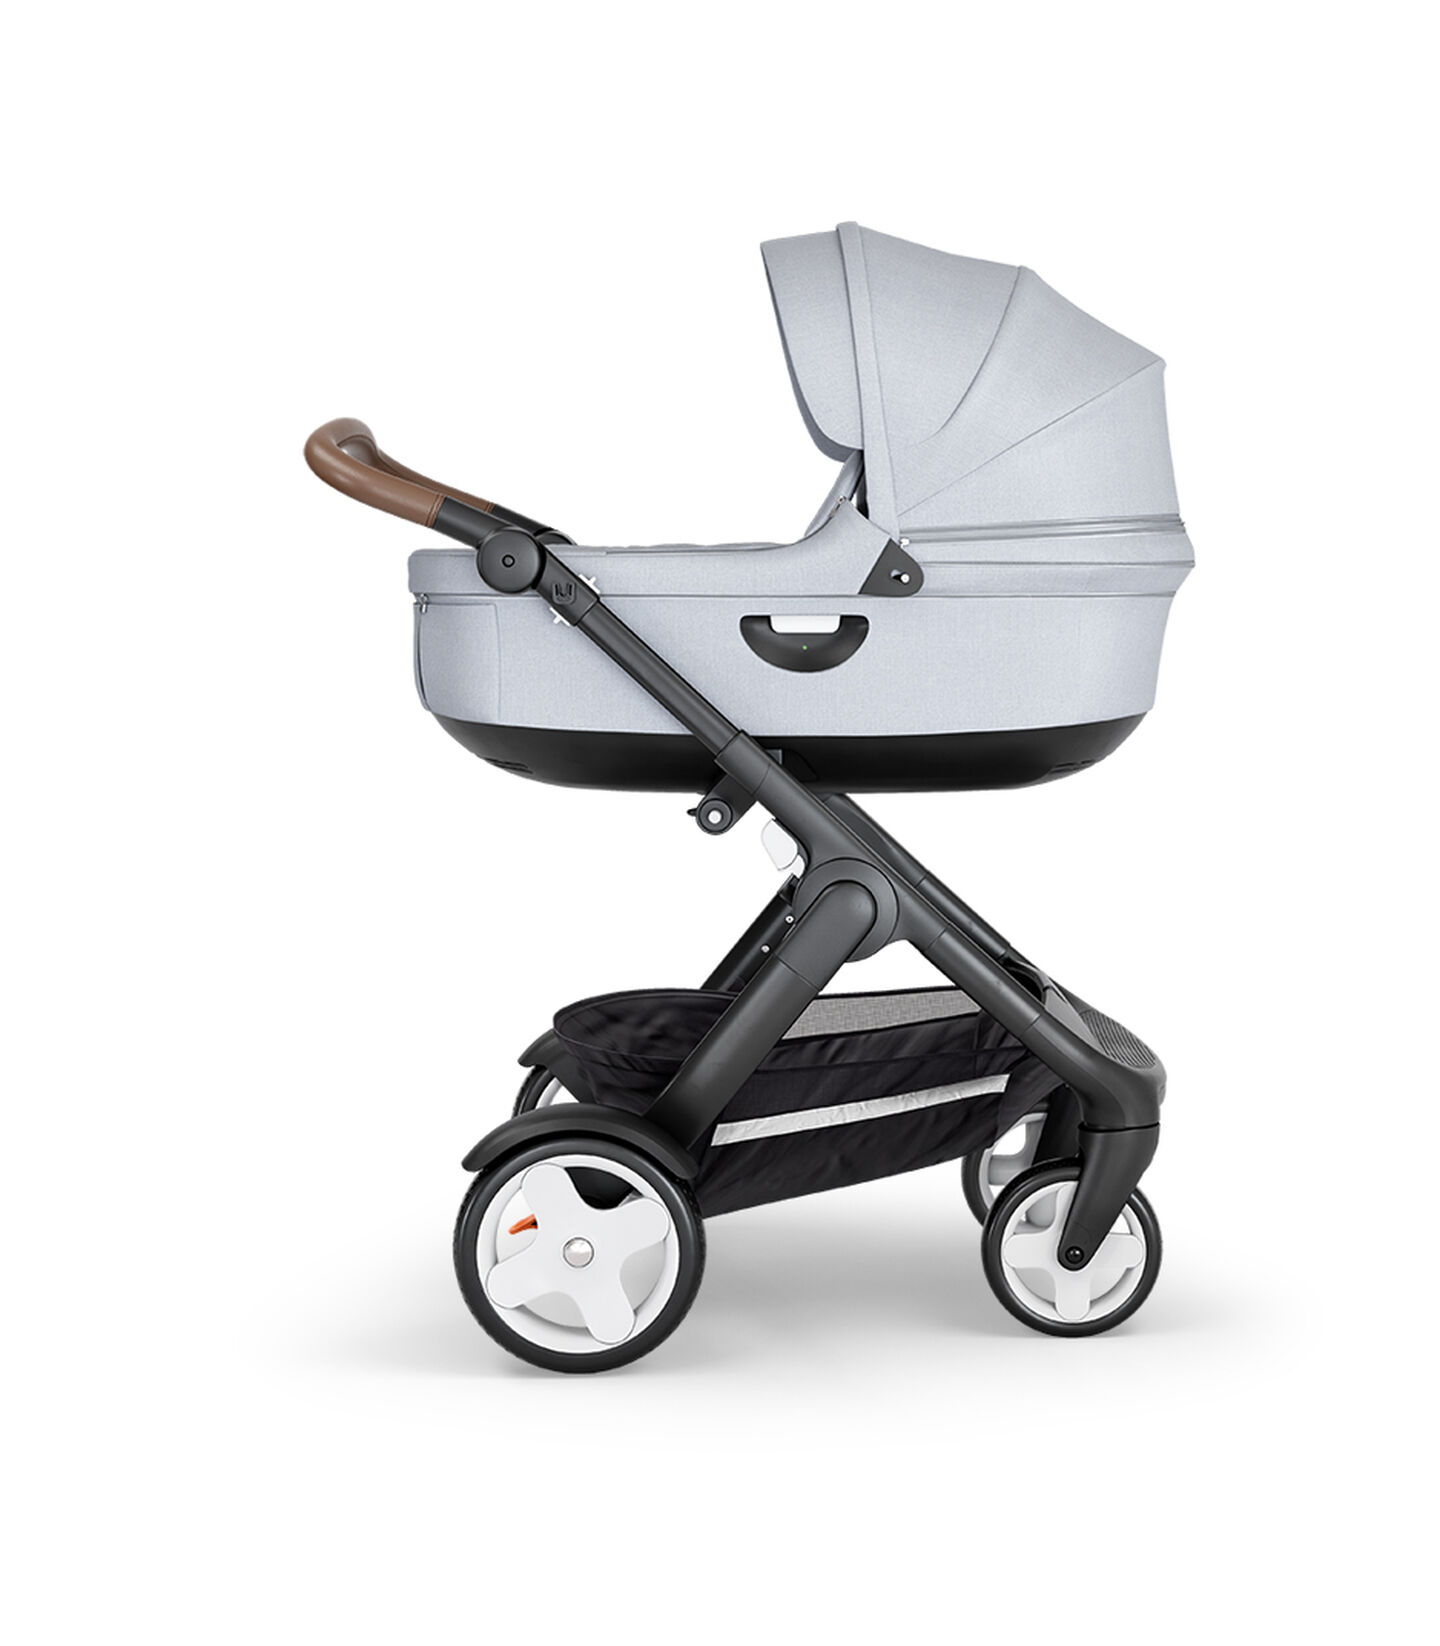 Stokke® Trailz™ with Black Chassis, Brown Leatherette and Classic Wheels. Stokke® Stroller Carry Cot, Grey Melange. view 2